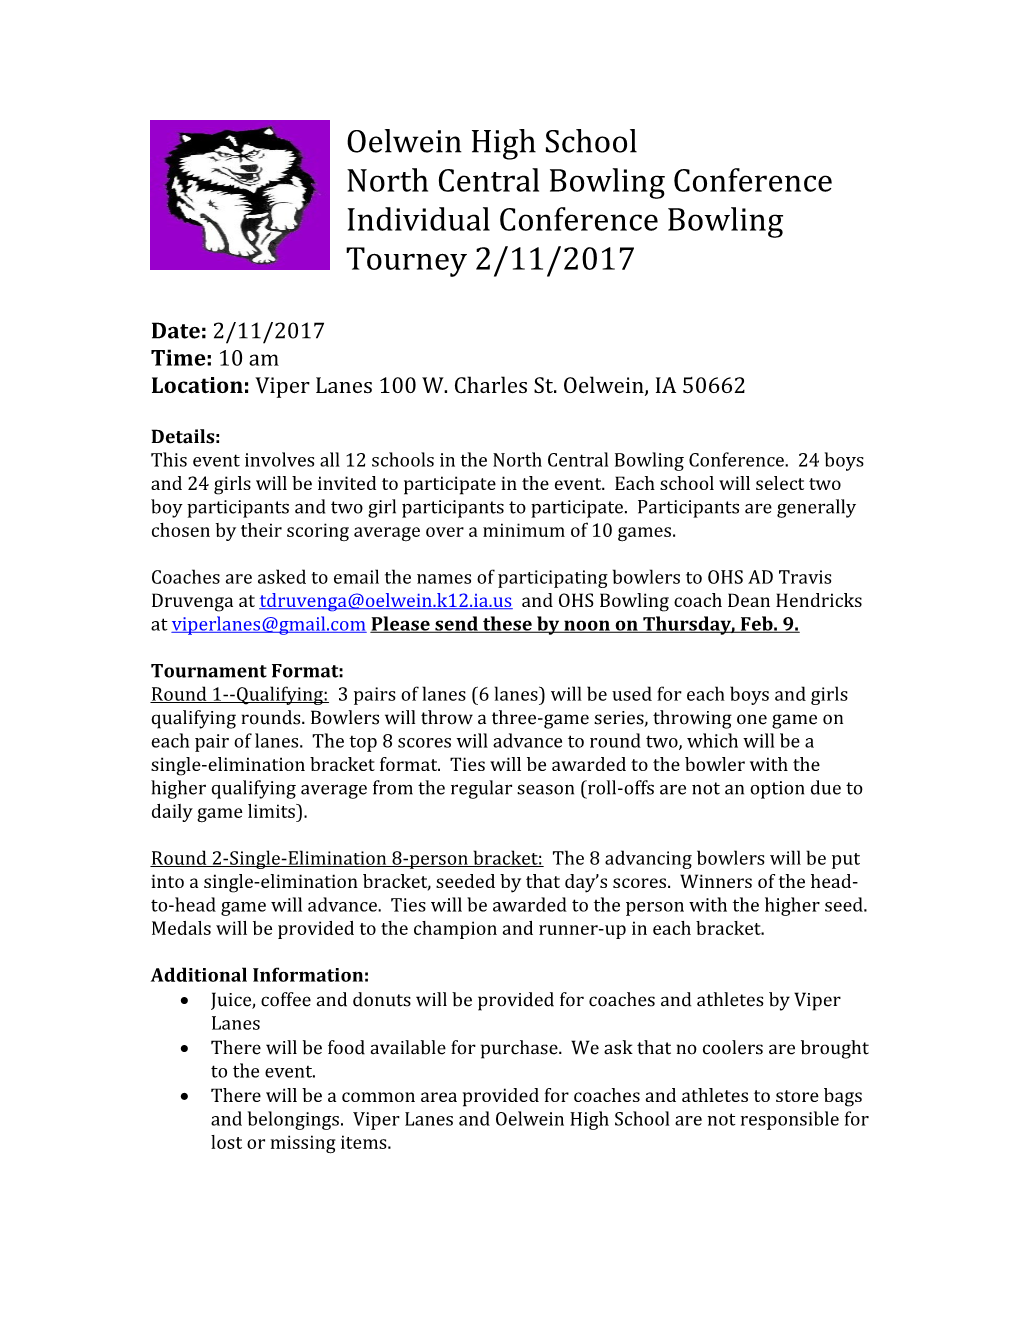 North Central Bowling Conference